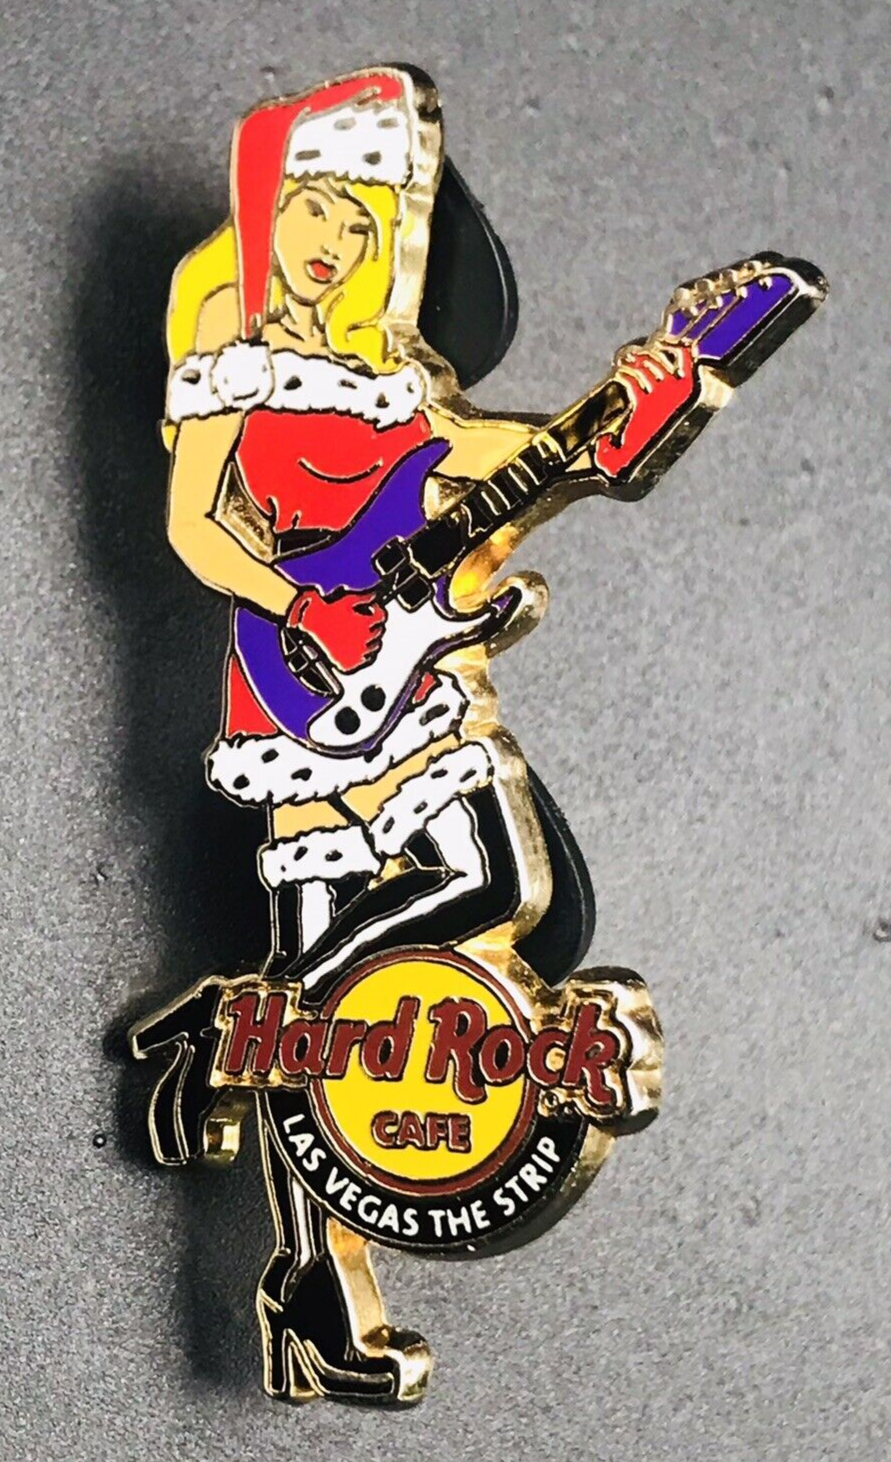 Primary image for 2009 Hard Rock Cafe Las Vegas The Strip Pin Santa Lady w/ Guitar LE -- 2" x 1"